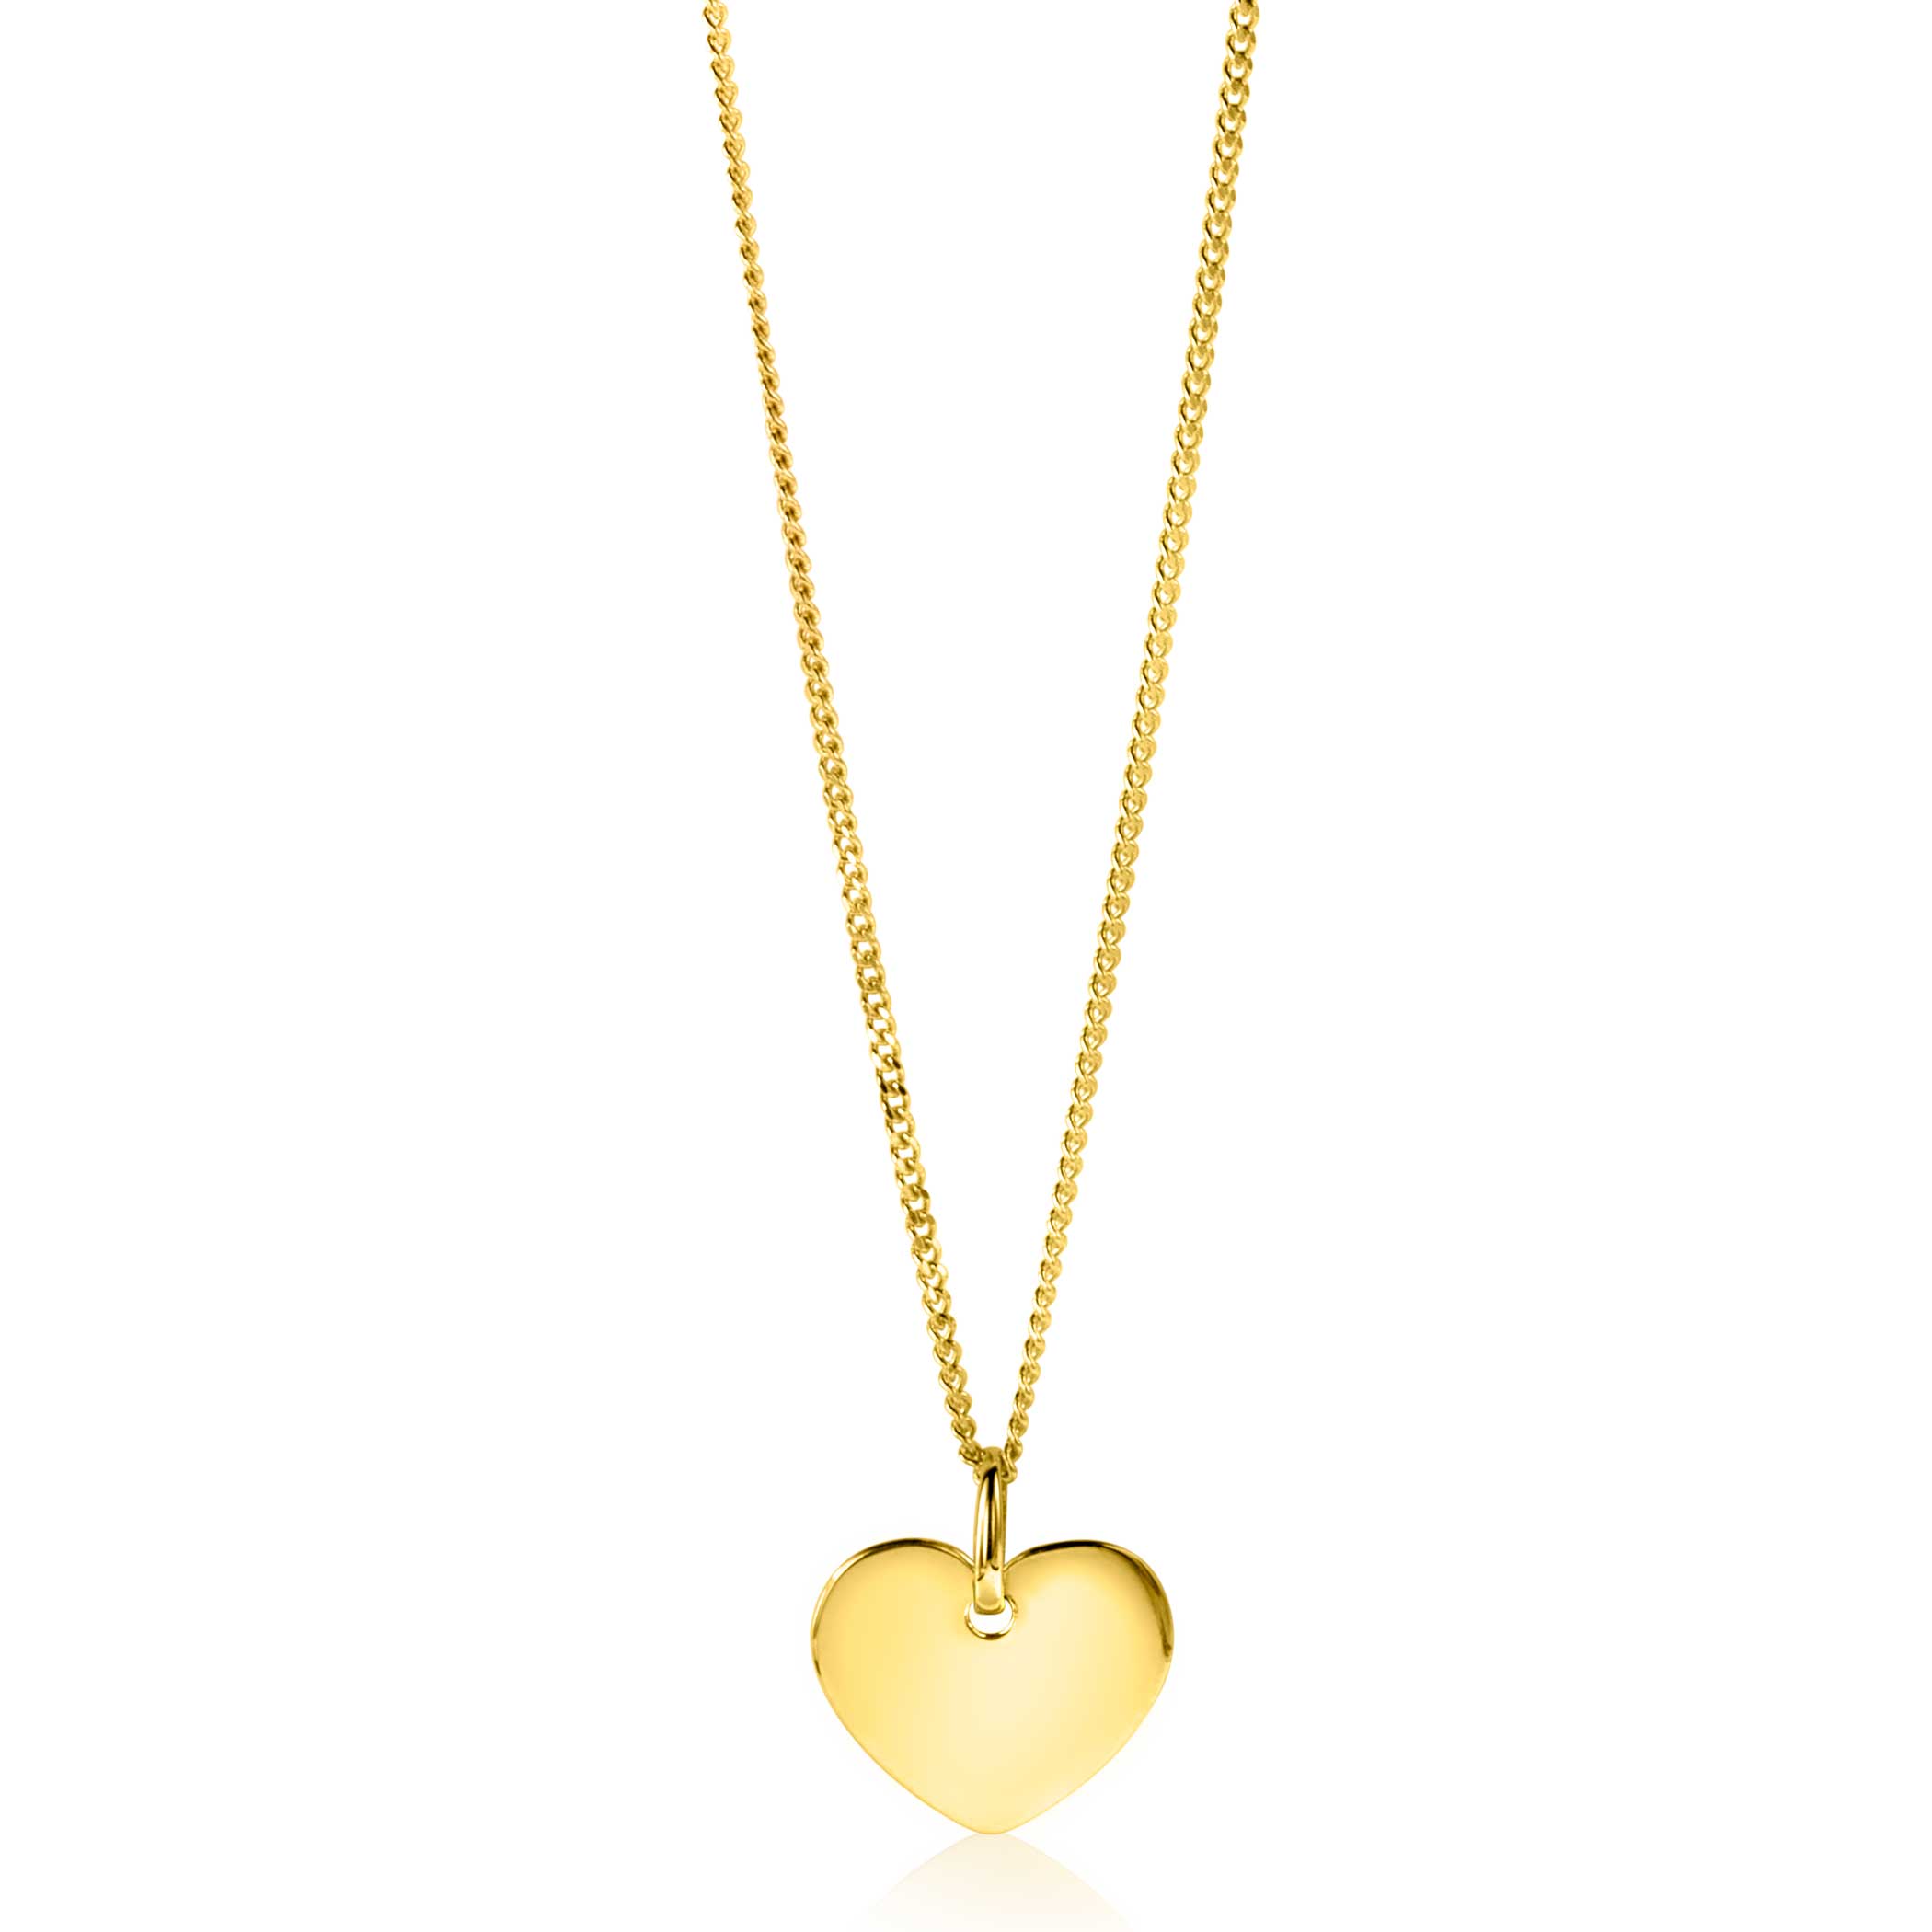 12mm ZINZI 14K Gold Pendant Trendy Shiny Heart ZGH396-12 (excl. necklace)